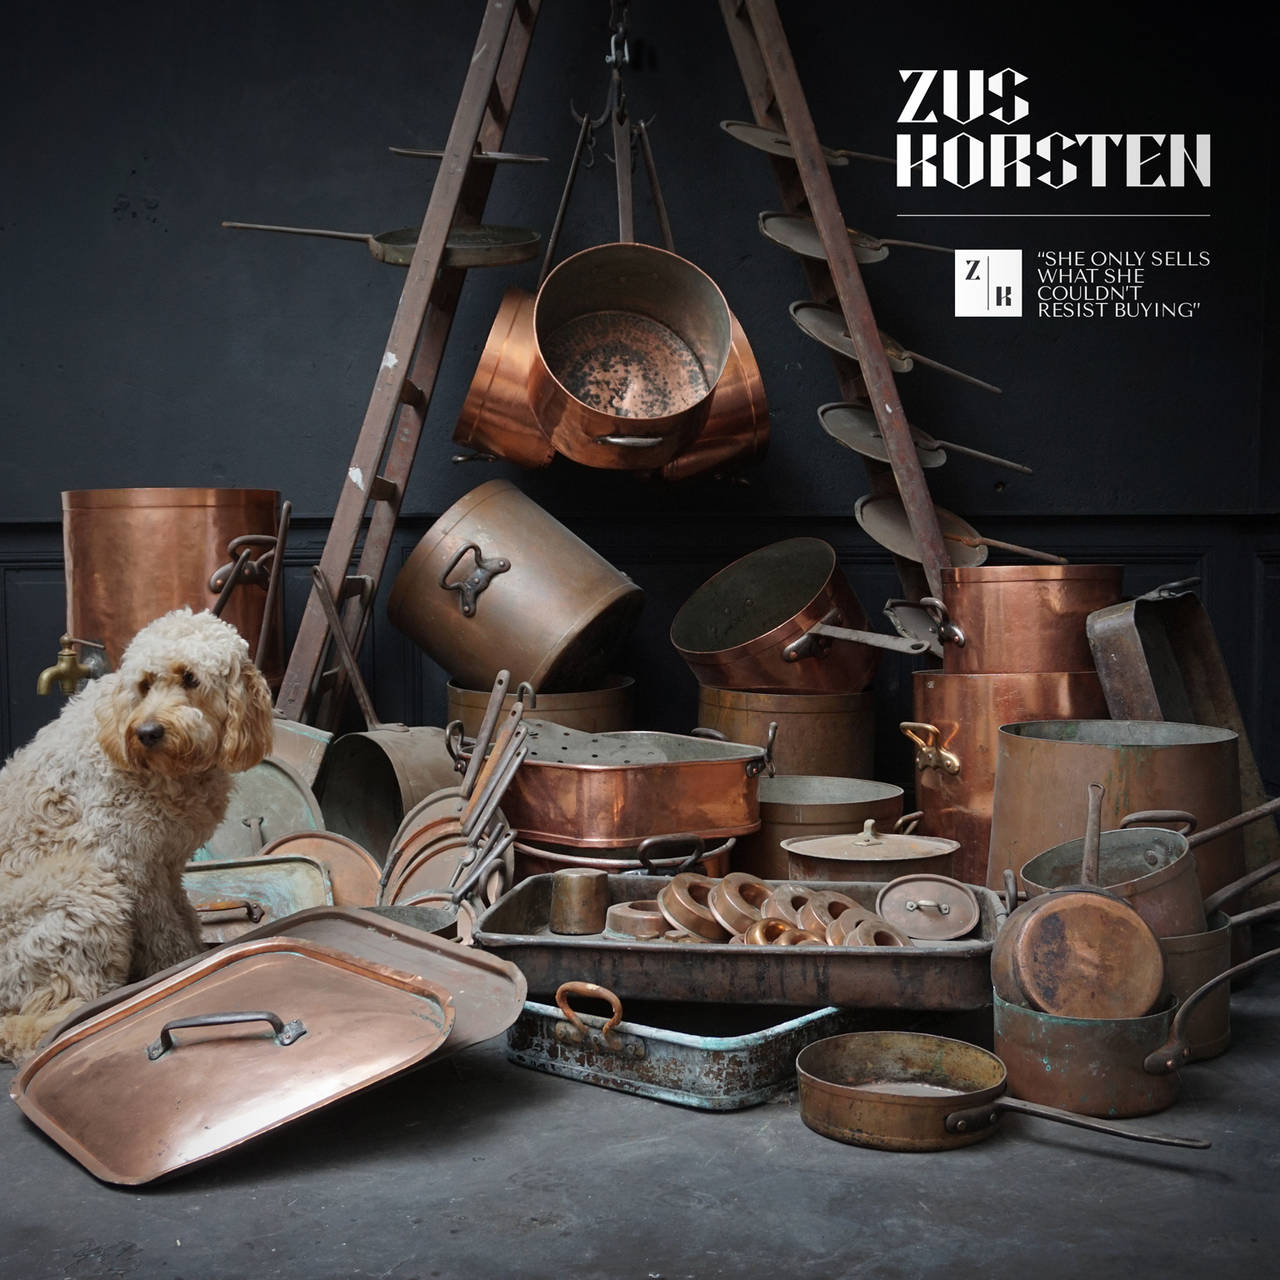 This enormous antique collection of culinary copper pots and pans came from the early years of the Trade Fair Utrecht restaurant in the Netherlands. It's dated 1900-1910. This collection is not only special because of the huge sizes of the different